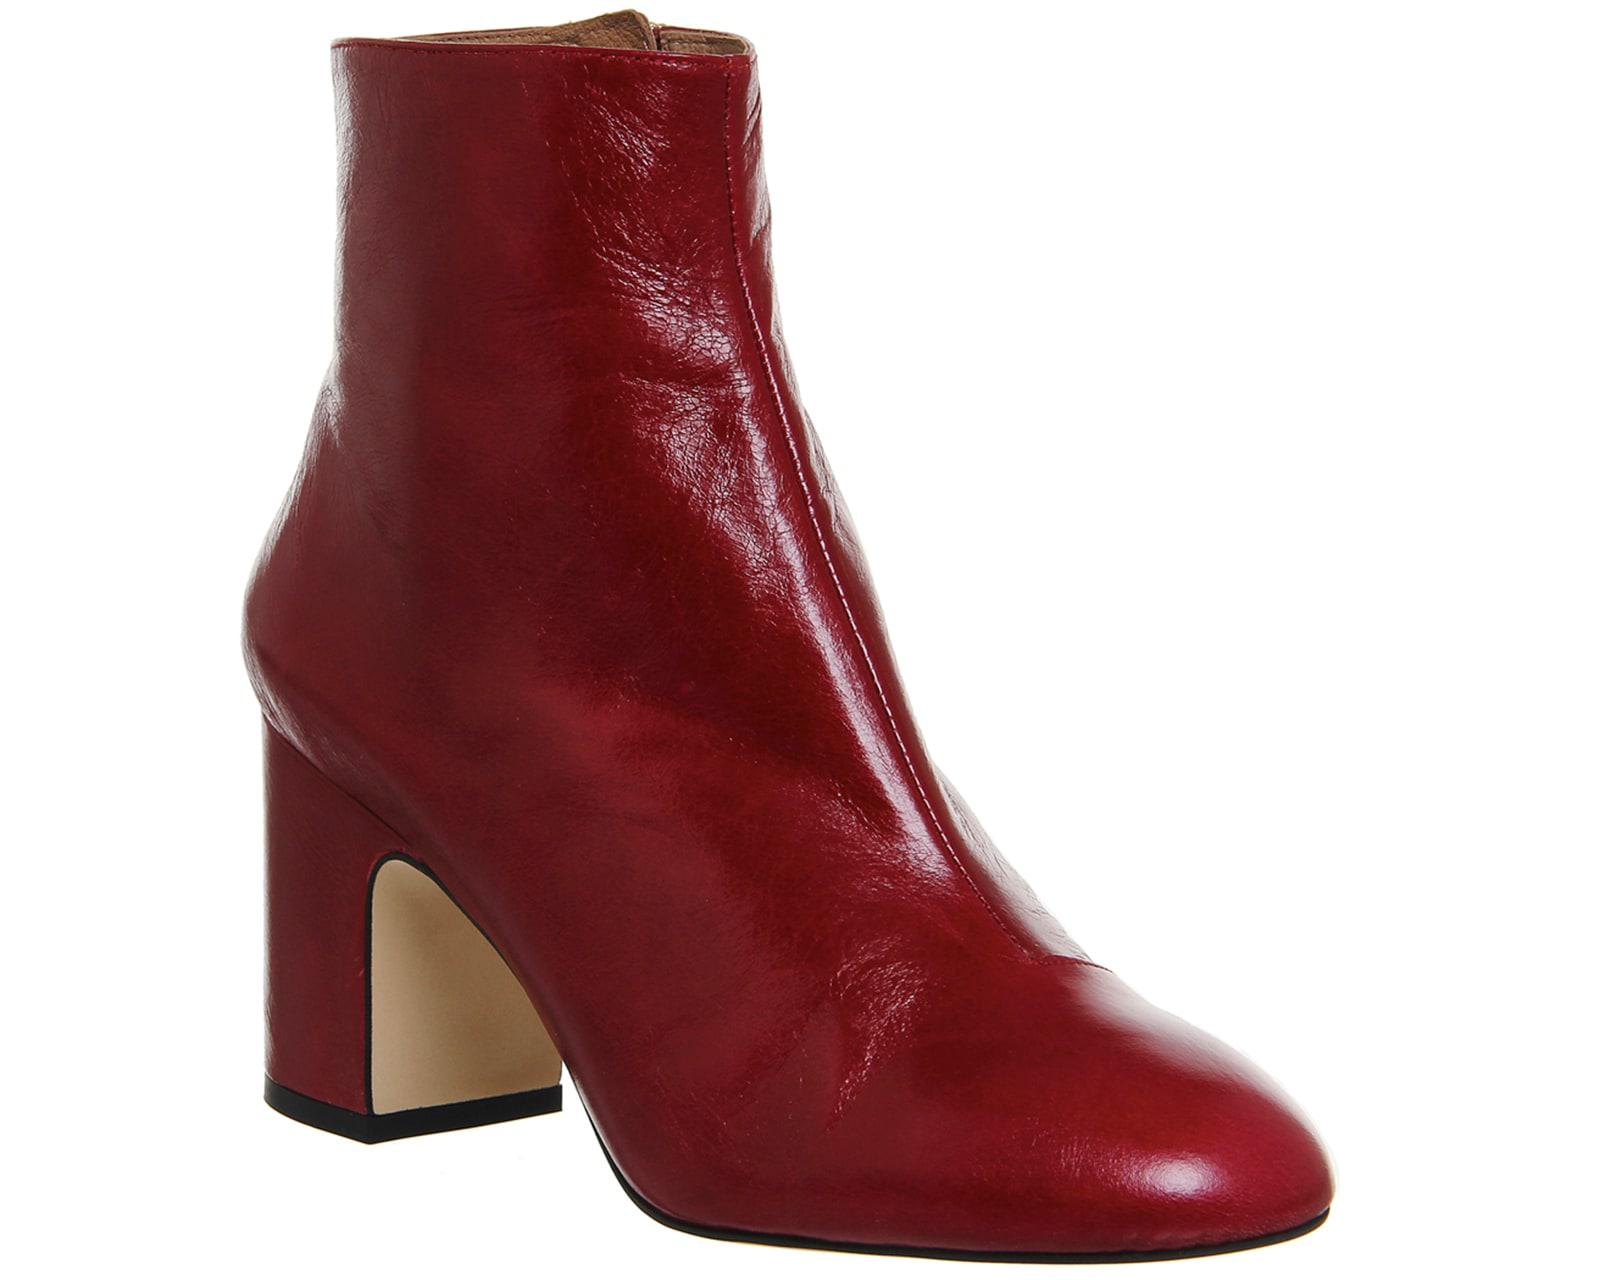 red block heel ankle boots